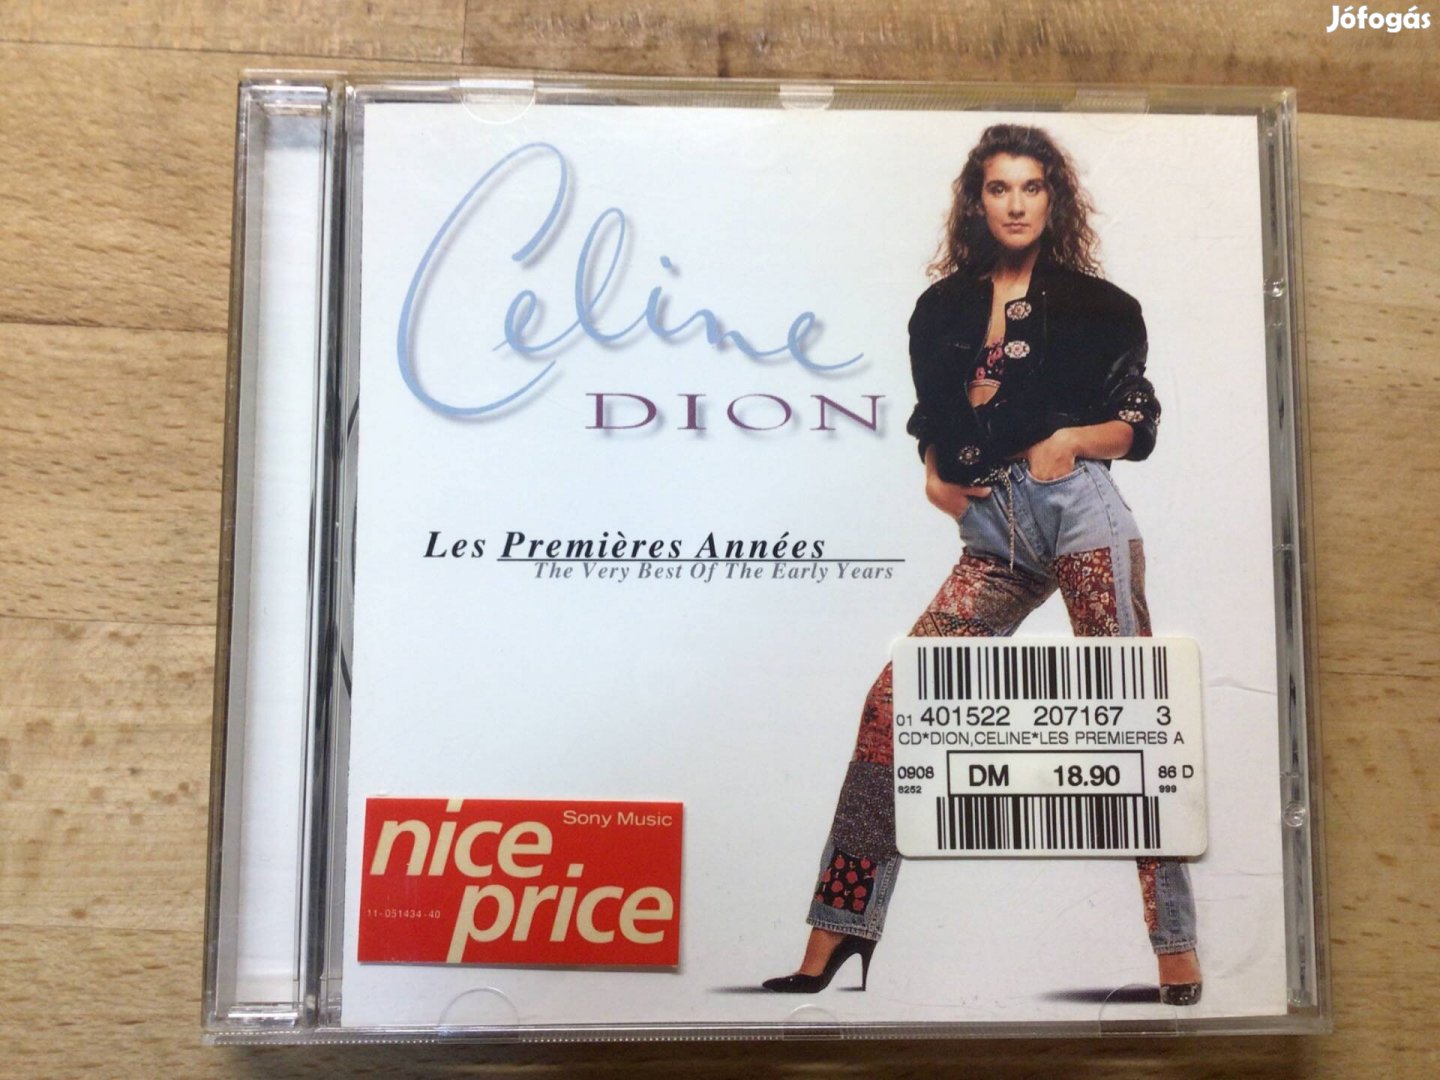 Celine Dion - Les Premiéres Années ( The Very Best Of The Early Years)